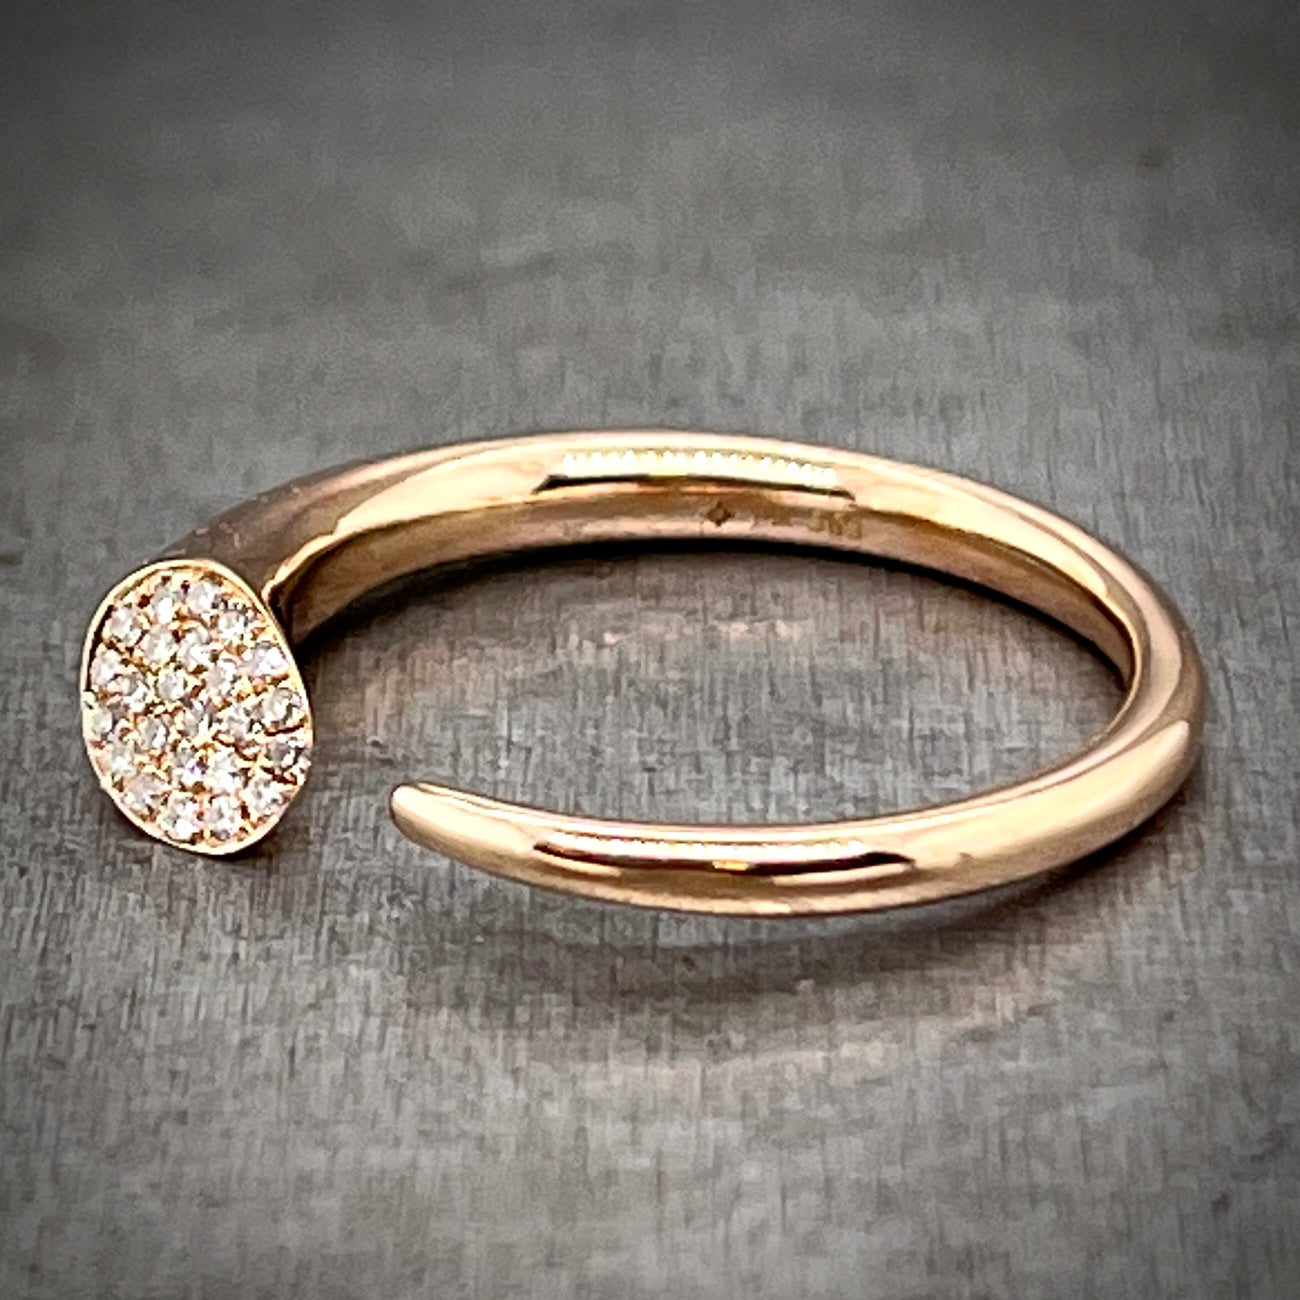 Full view of abstract rose gold and diamond ring laying down, angled slightly so you can better see the face of the setting for the diamonds.